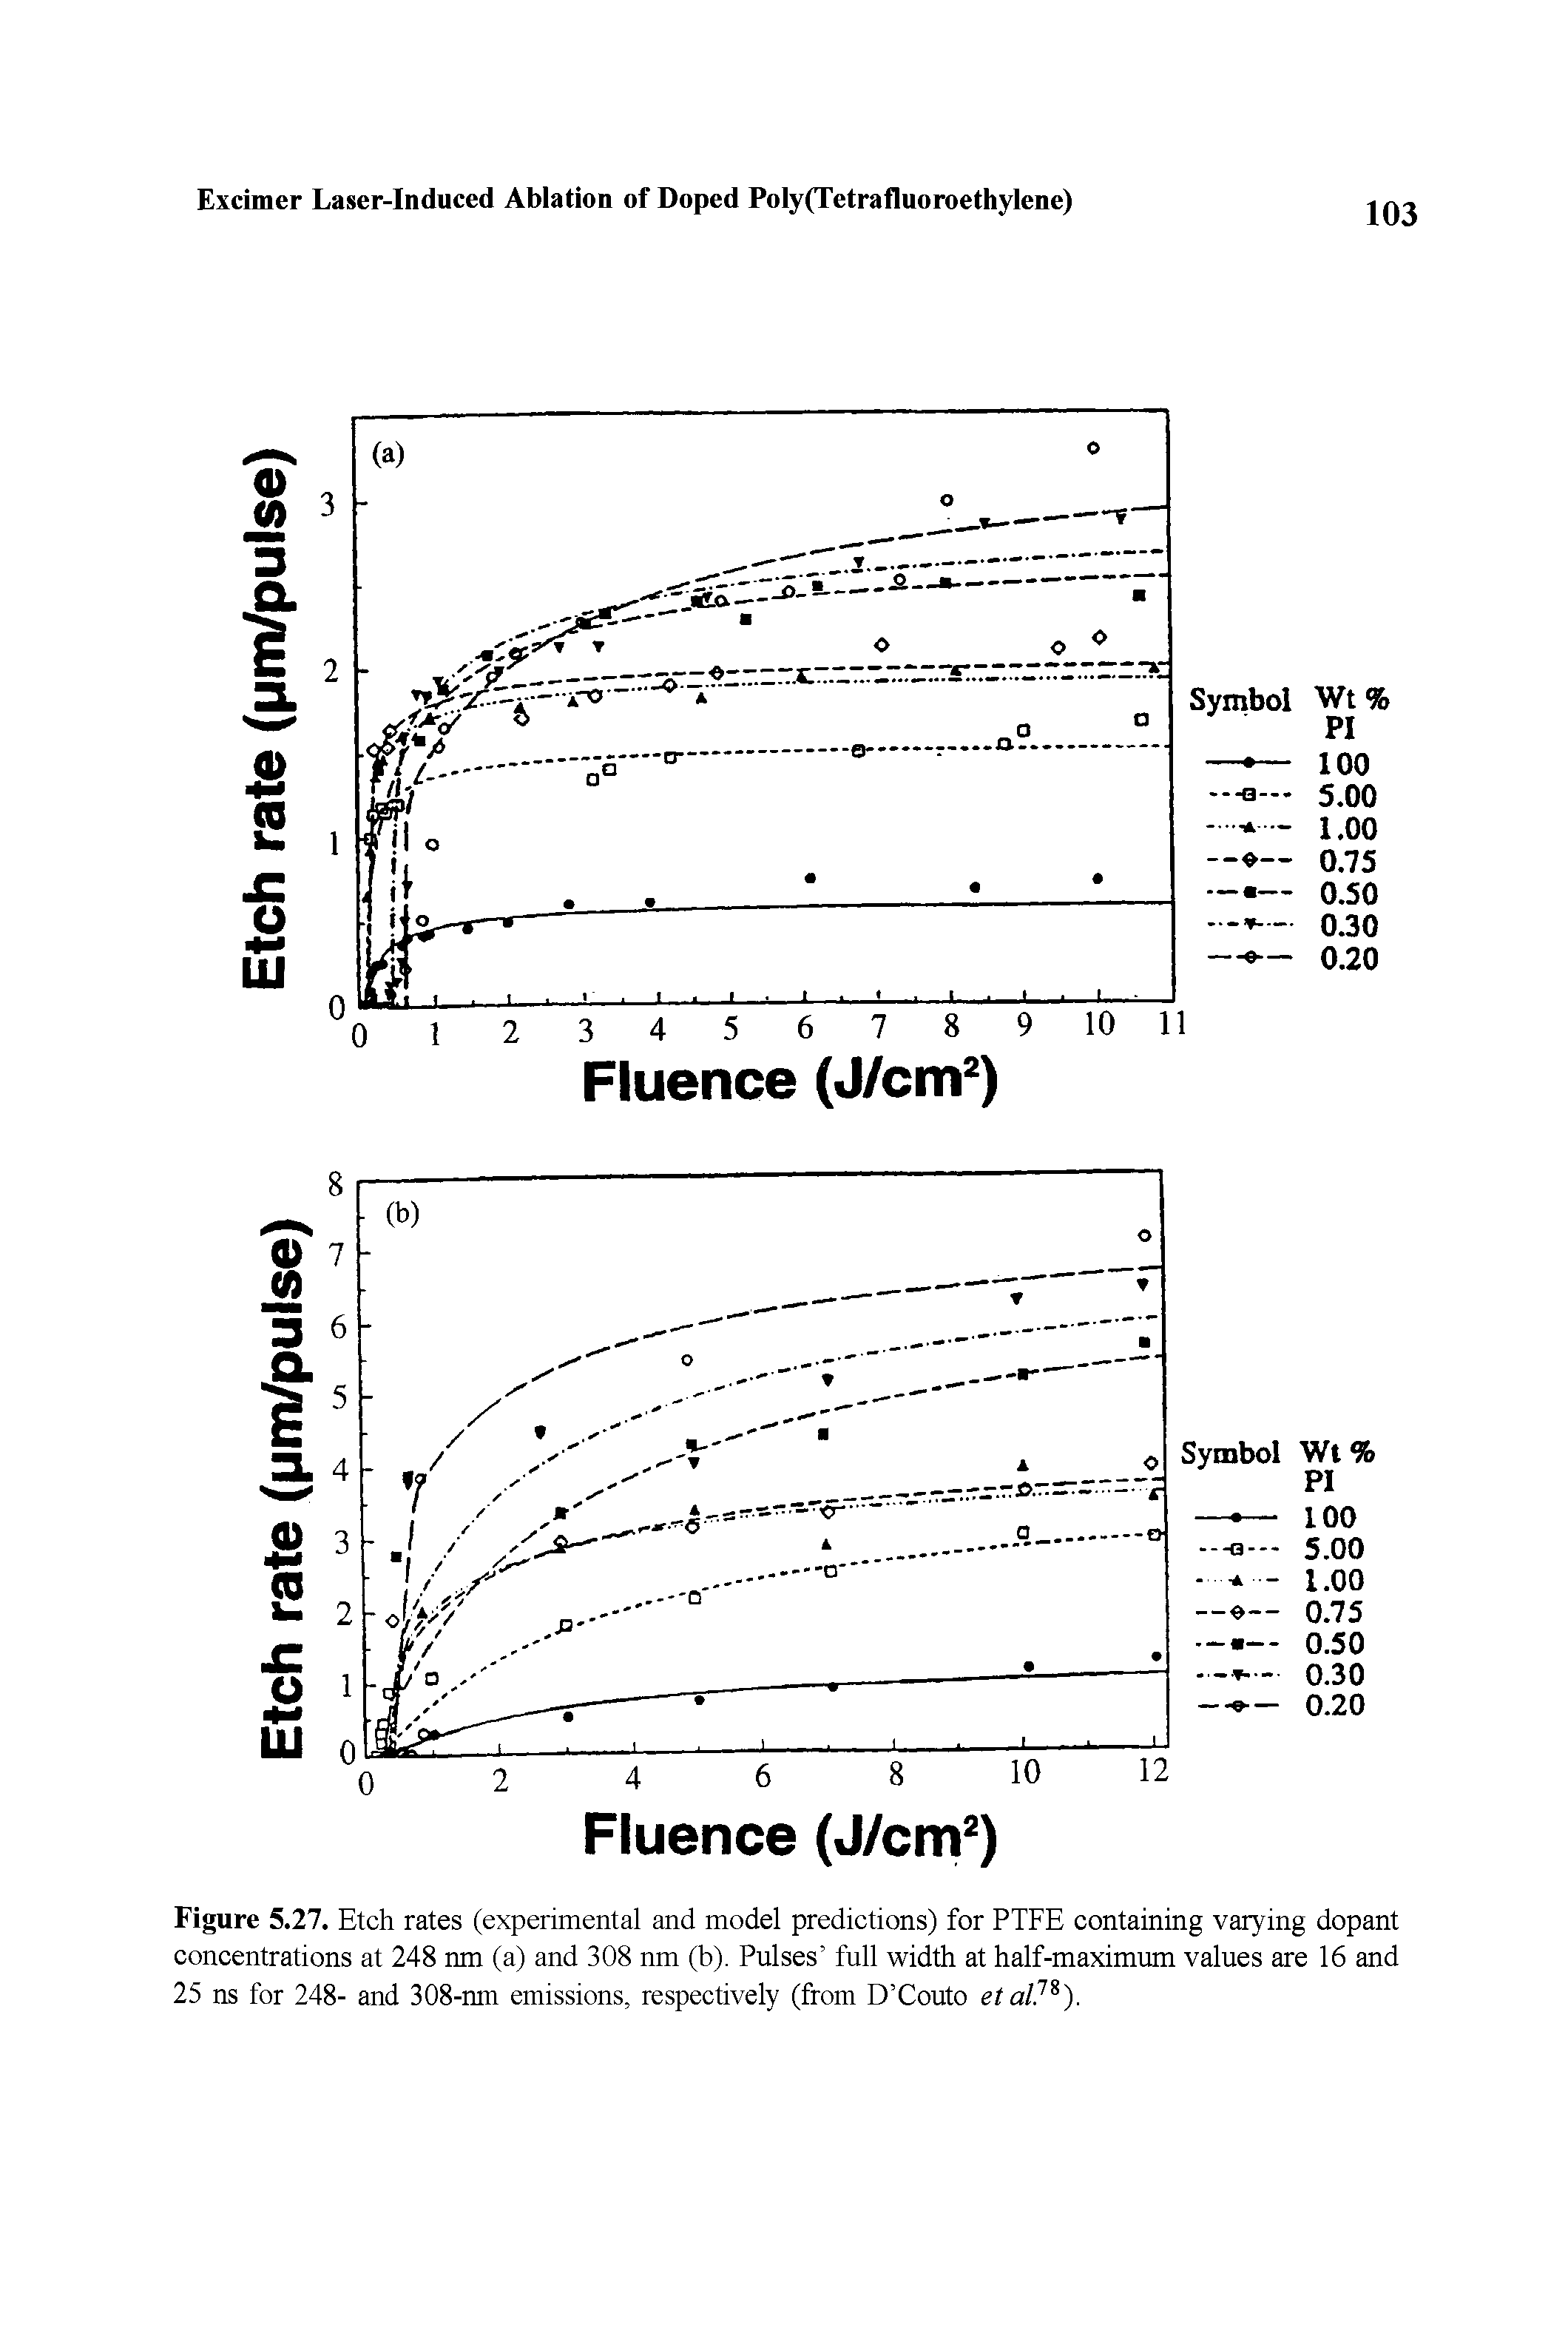 Figure 5.27. Etch rates (experimental and model predictions) for PTFE containing varying dopant concentrations at 248 nm (a) and 308 nm (b). Pulses full width at half-maximum values are 16 and 25 ns for 248- and 308-nm emissions, respectively (from D Couto eta/.78).